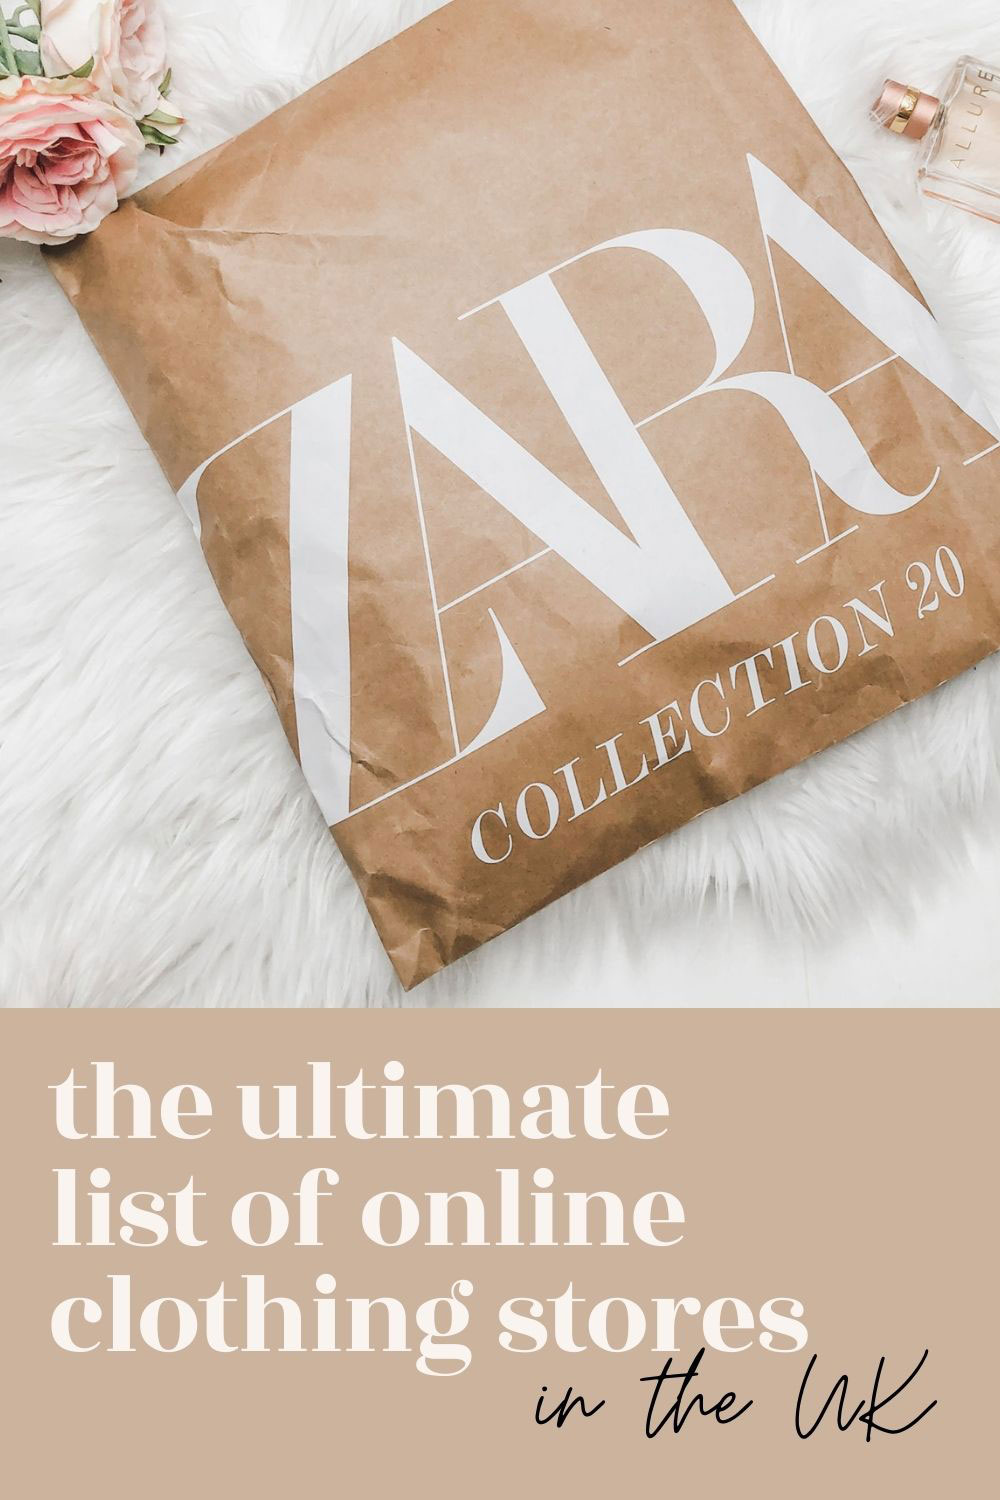 UK online clothing stores: the ultimate list